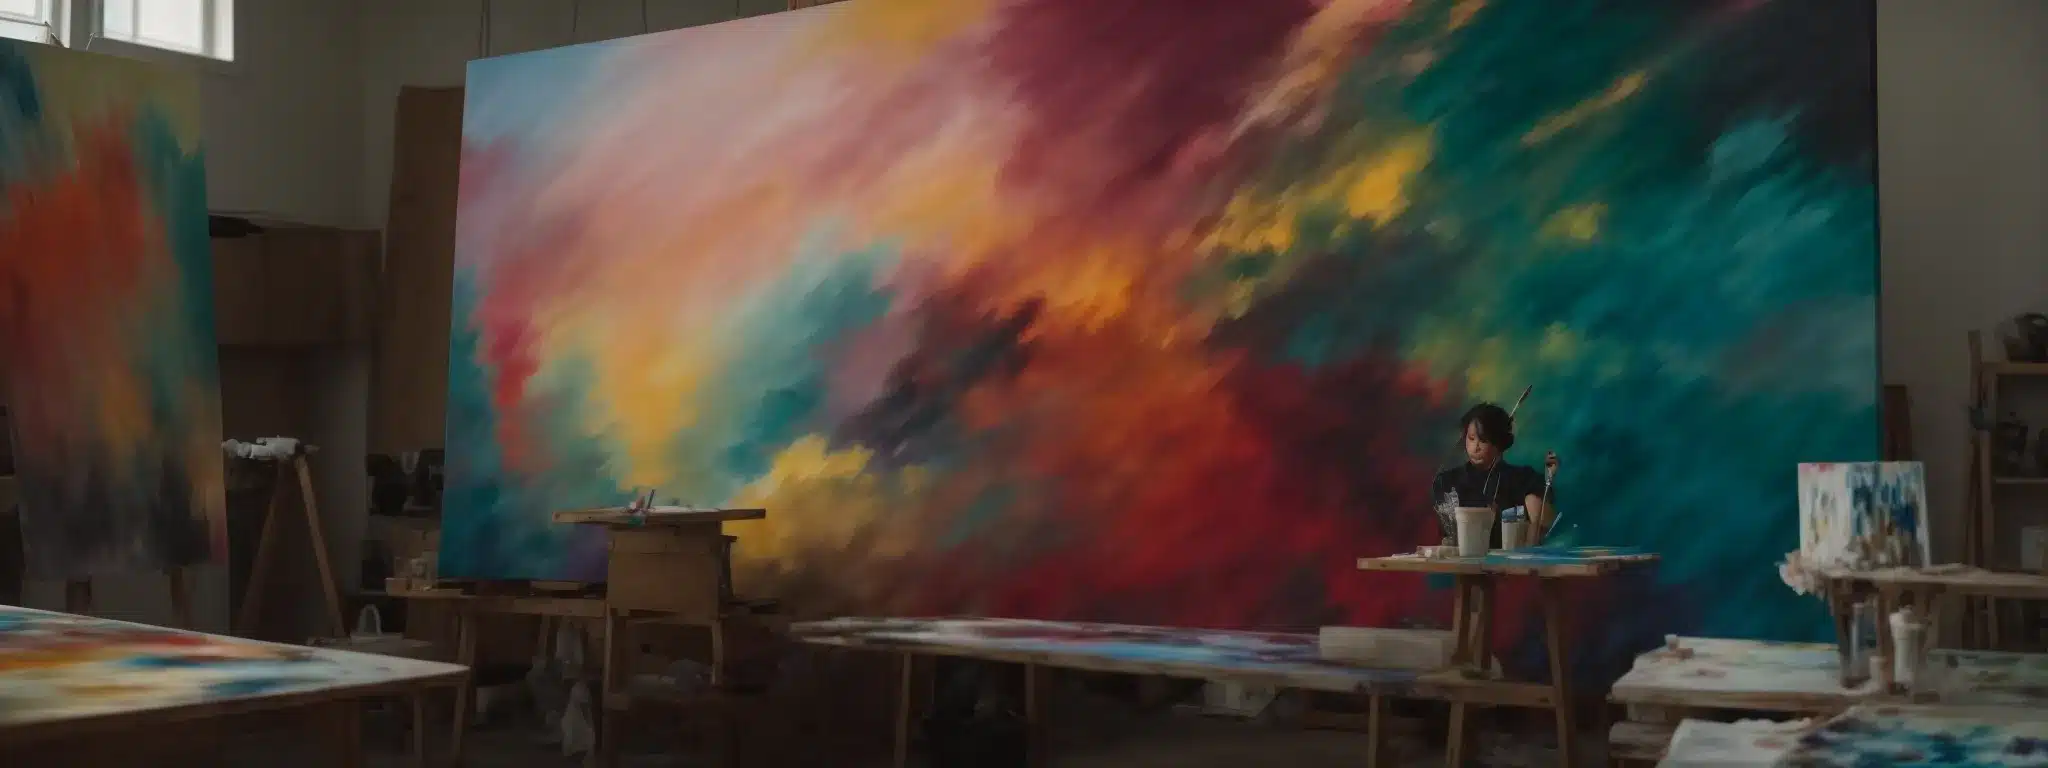 An Artist Paints Bold, Abstract Colors On A Large Canvas In A Sunlit Studio.